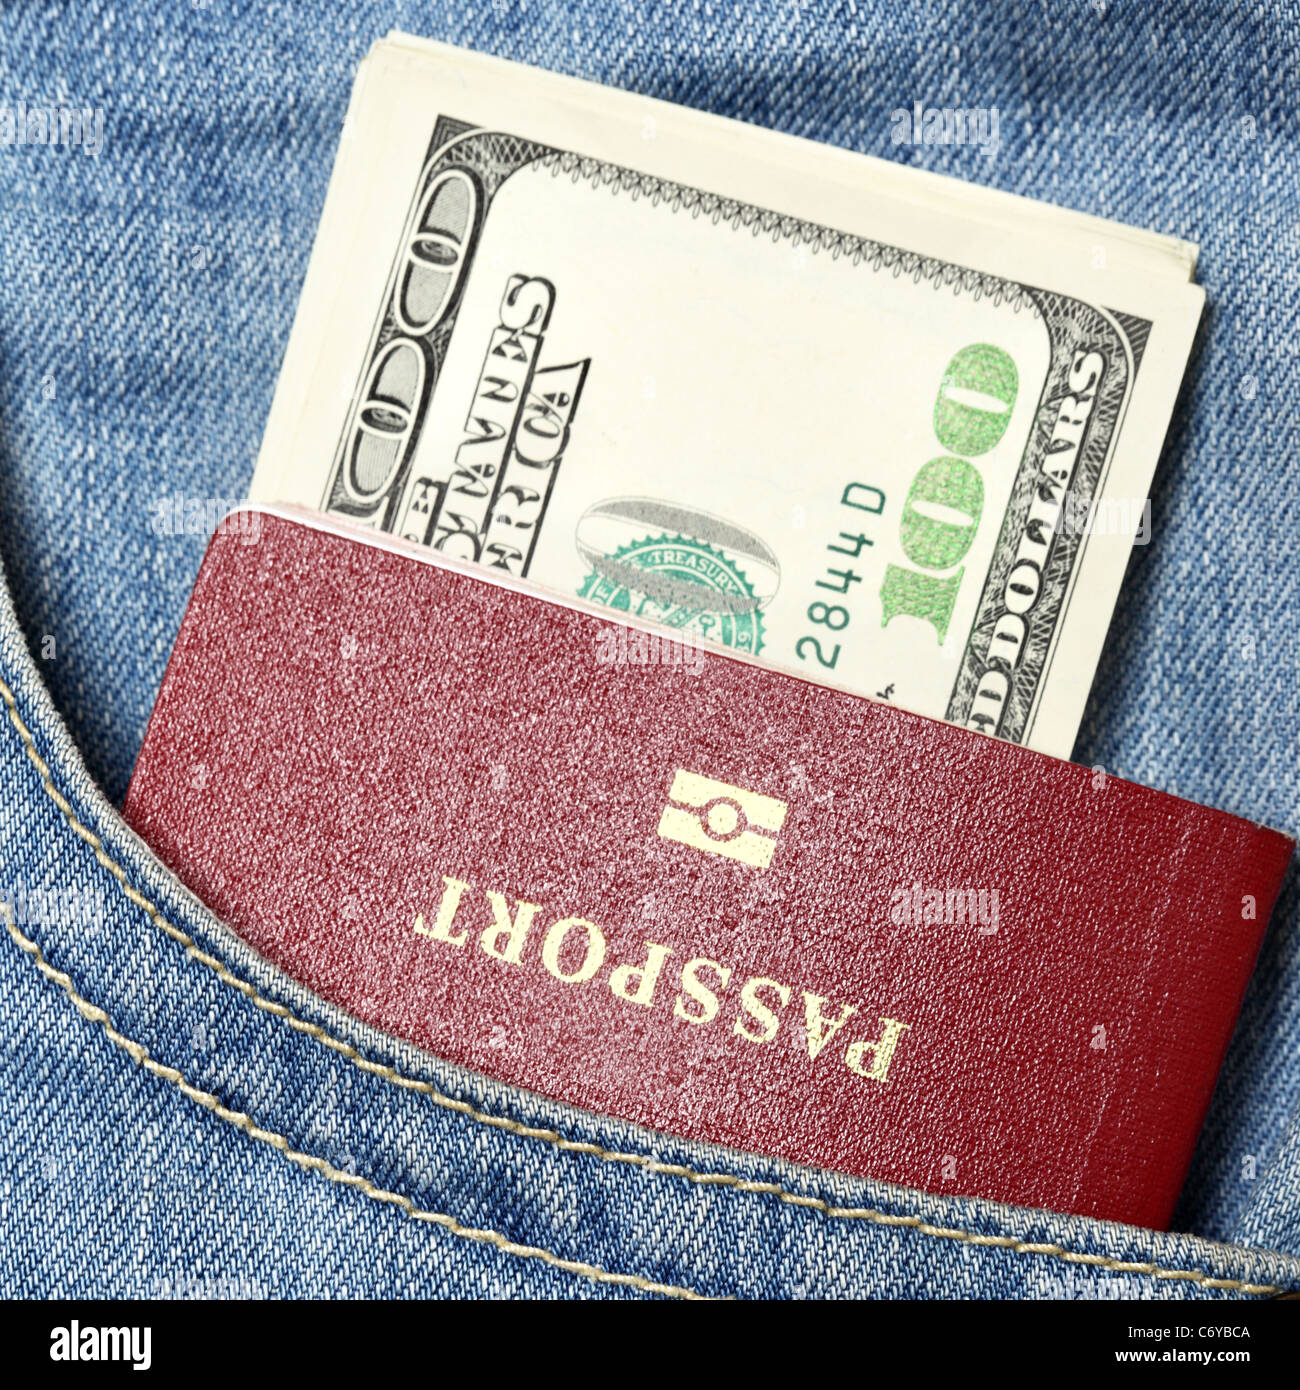 Passport and dollars in jeans pocket close-up Stock Photo